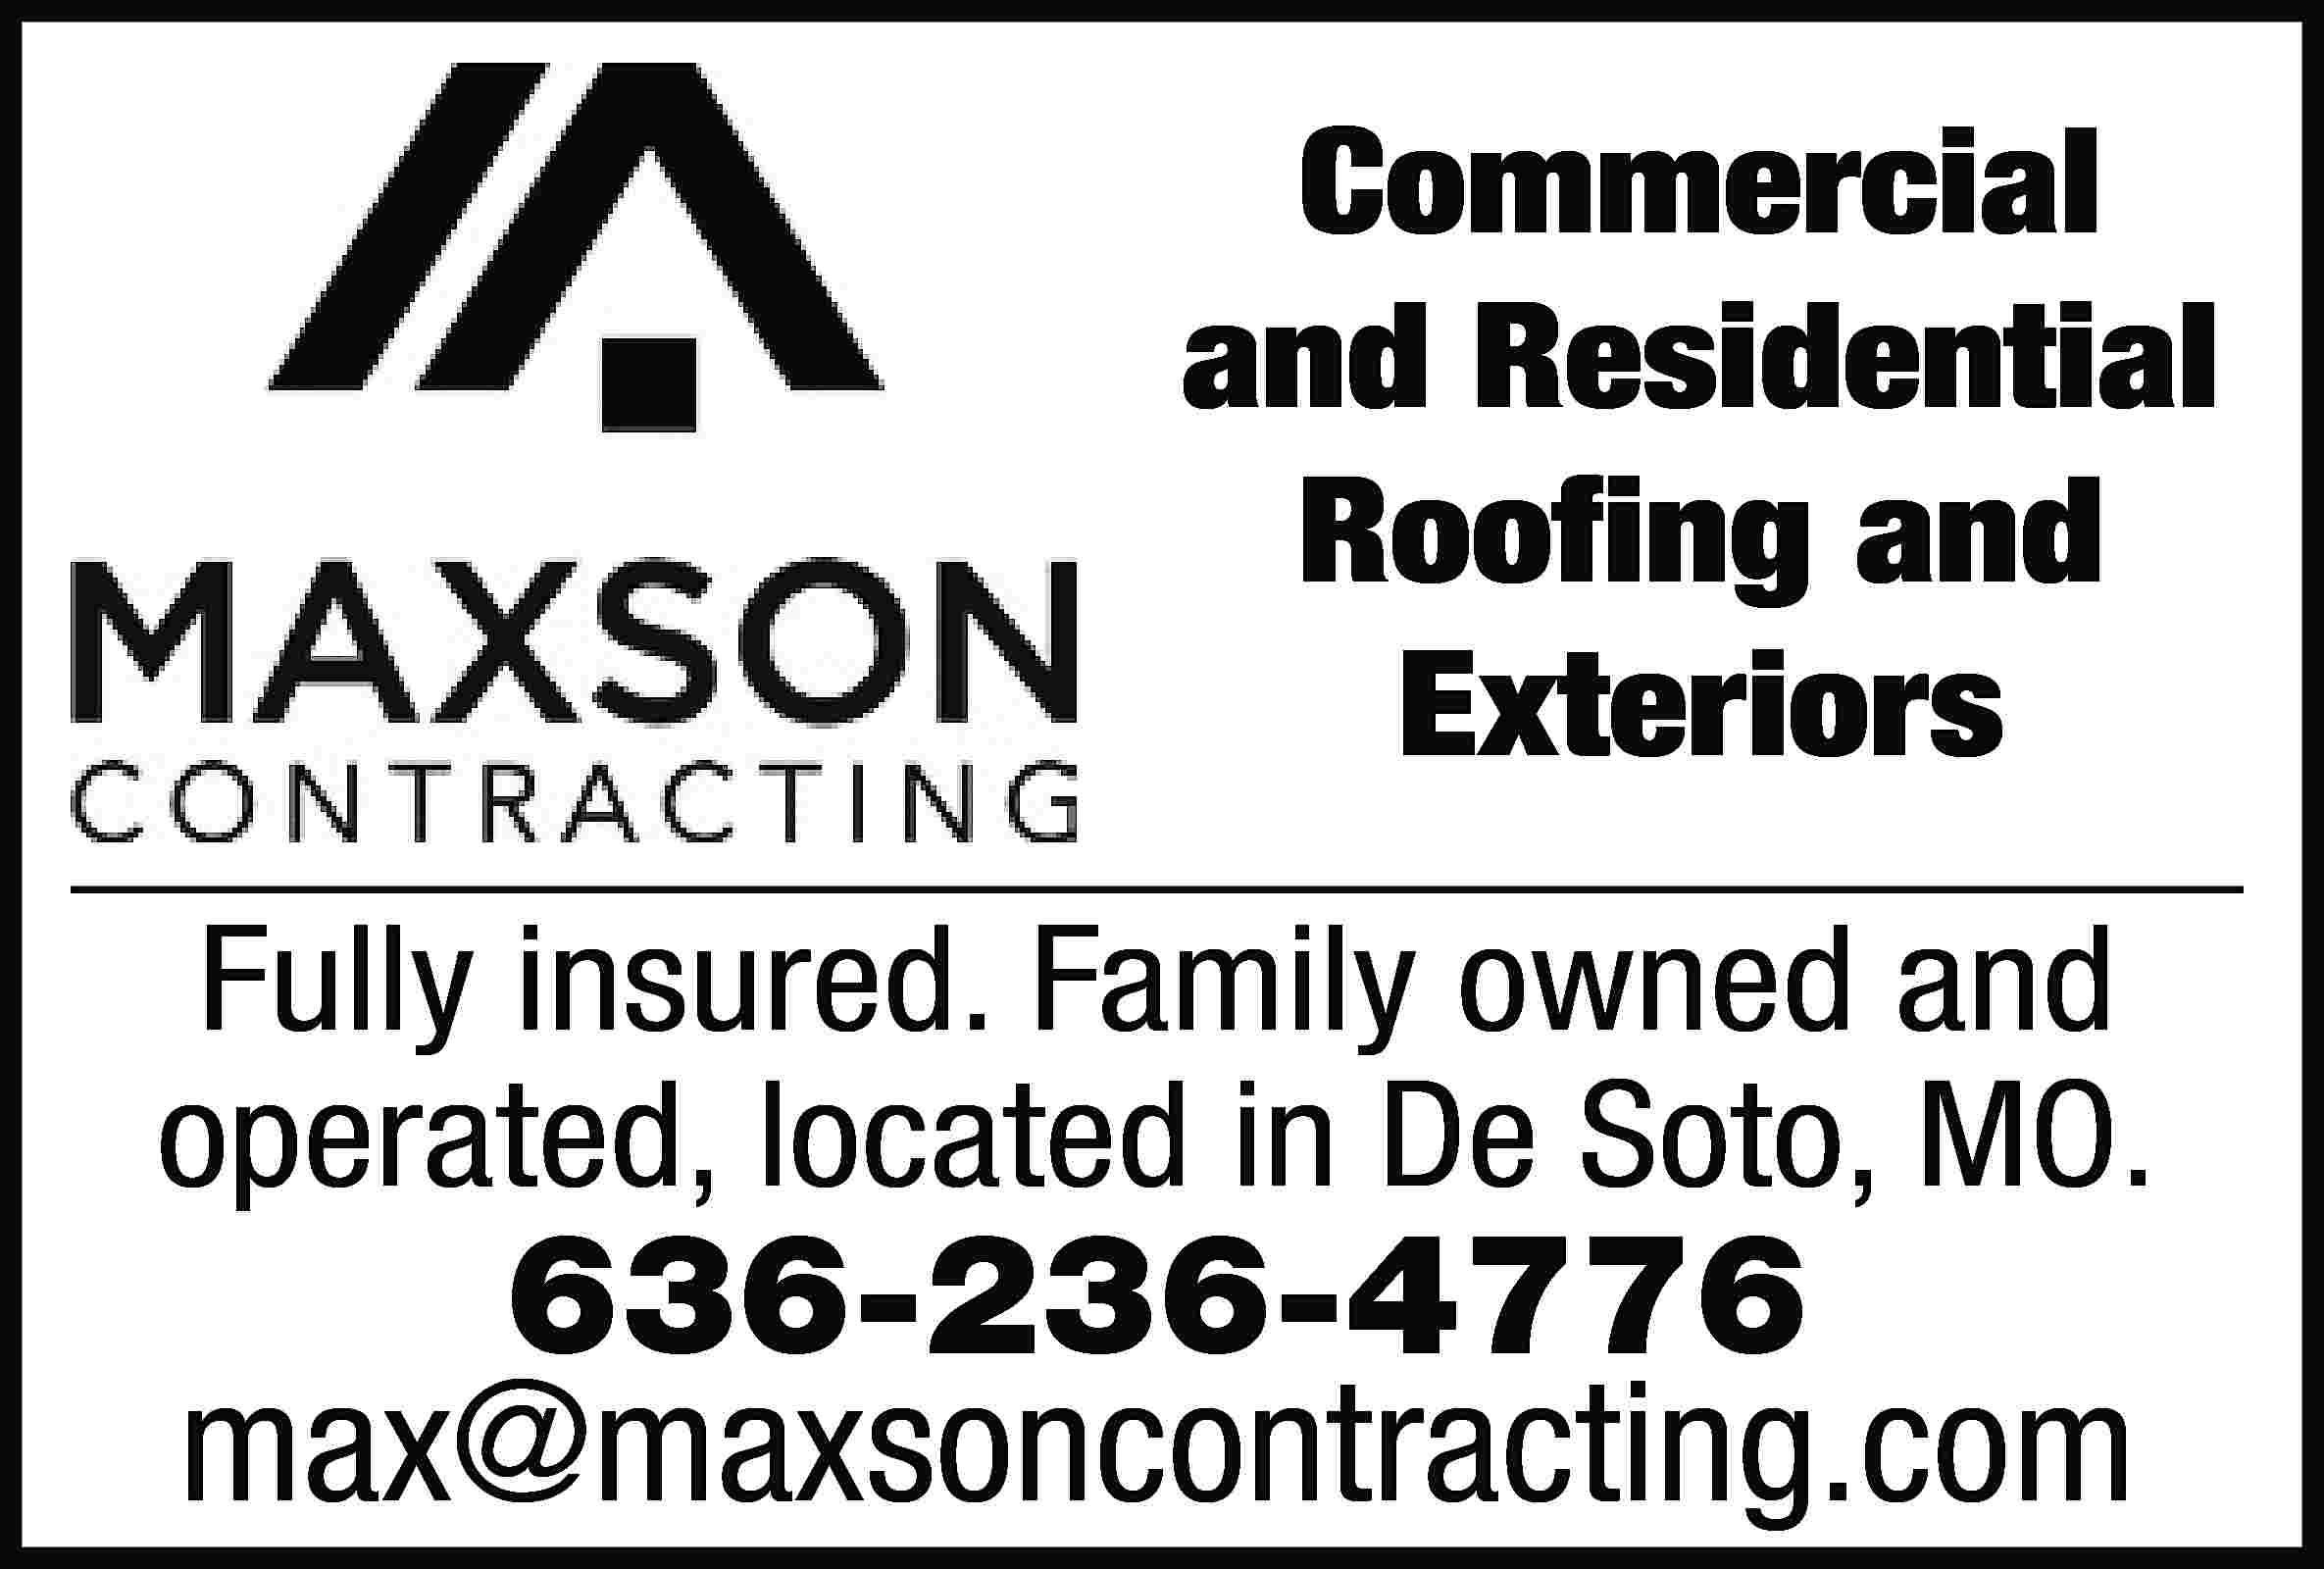 Commercial and Residential Roofing and  Commercial and Residential Roofing and Exteriors Fully insured. Family owned and operated, located in De Soto, MO. 636-236-4776 max@maxsoncontracting.com